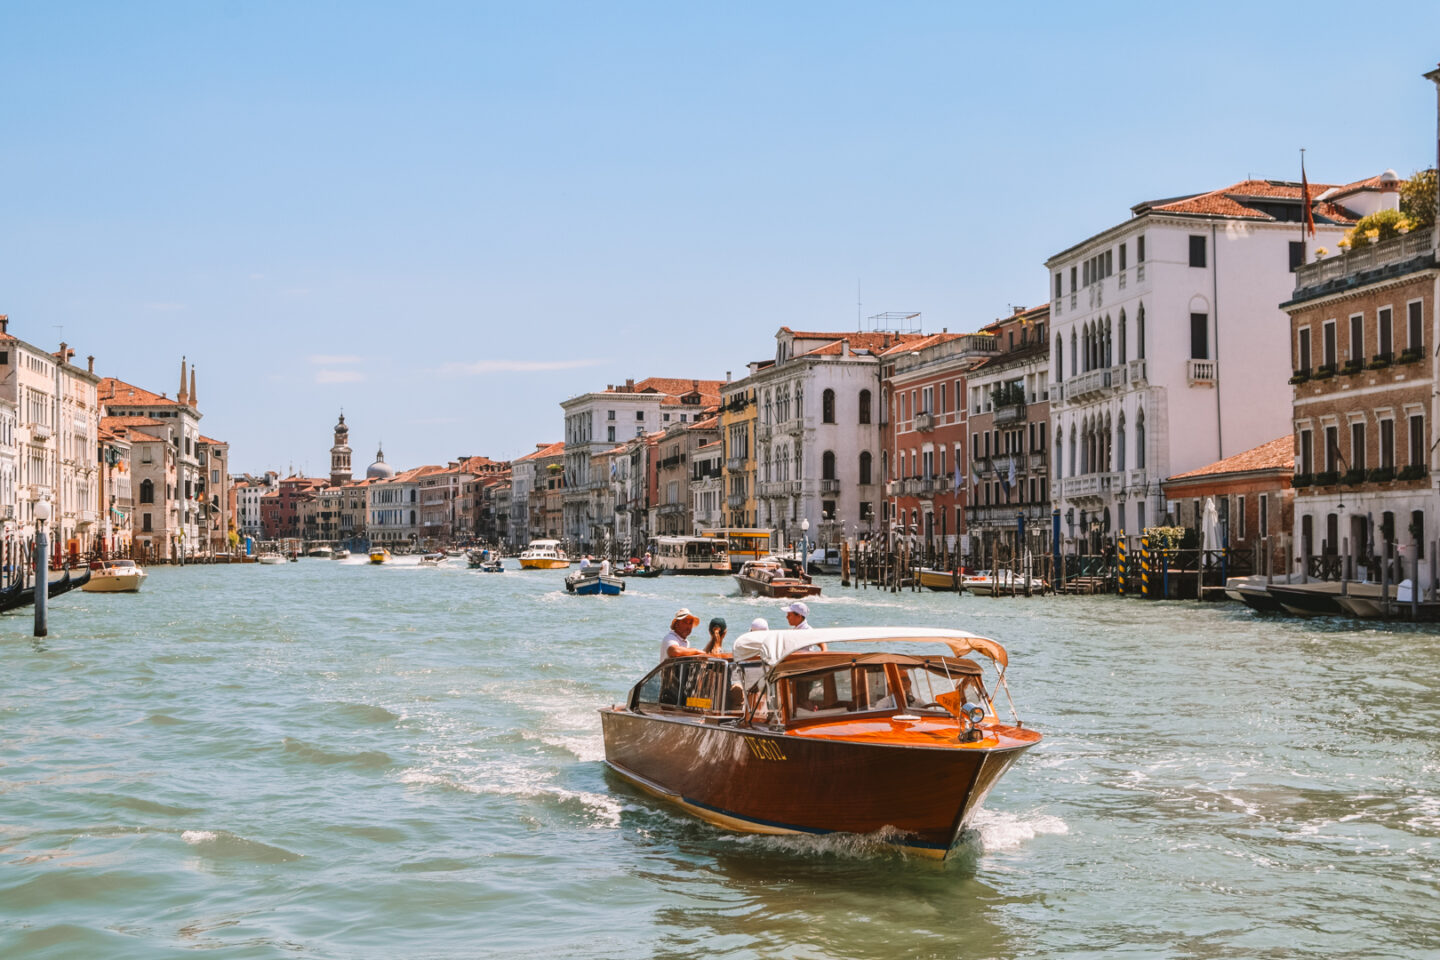 3 days in Venice - Visit the canals